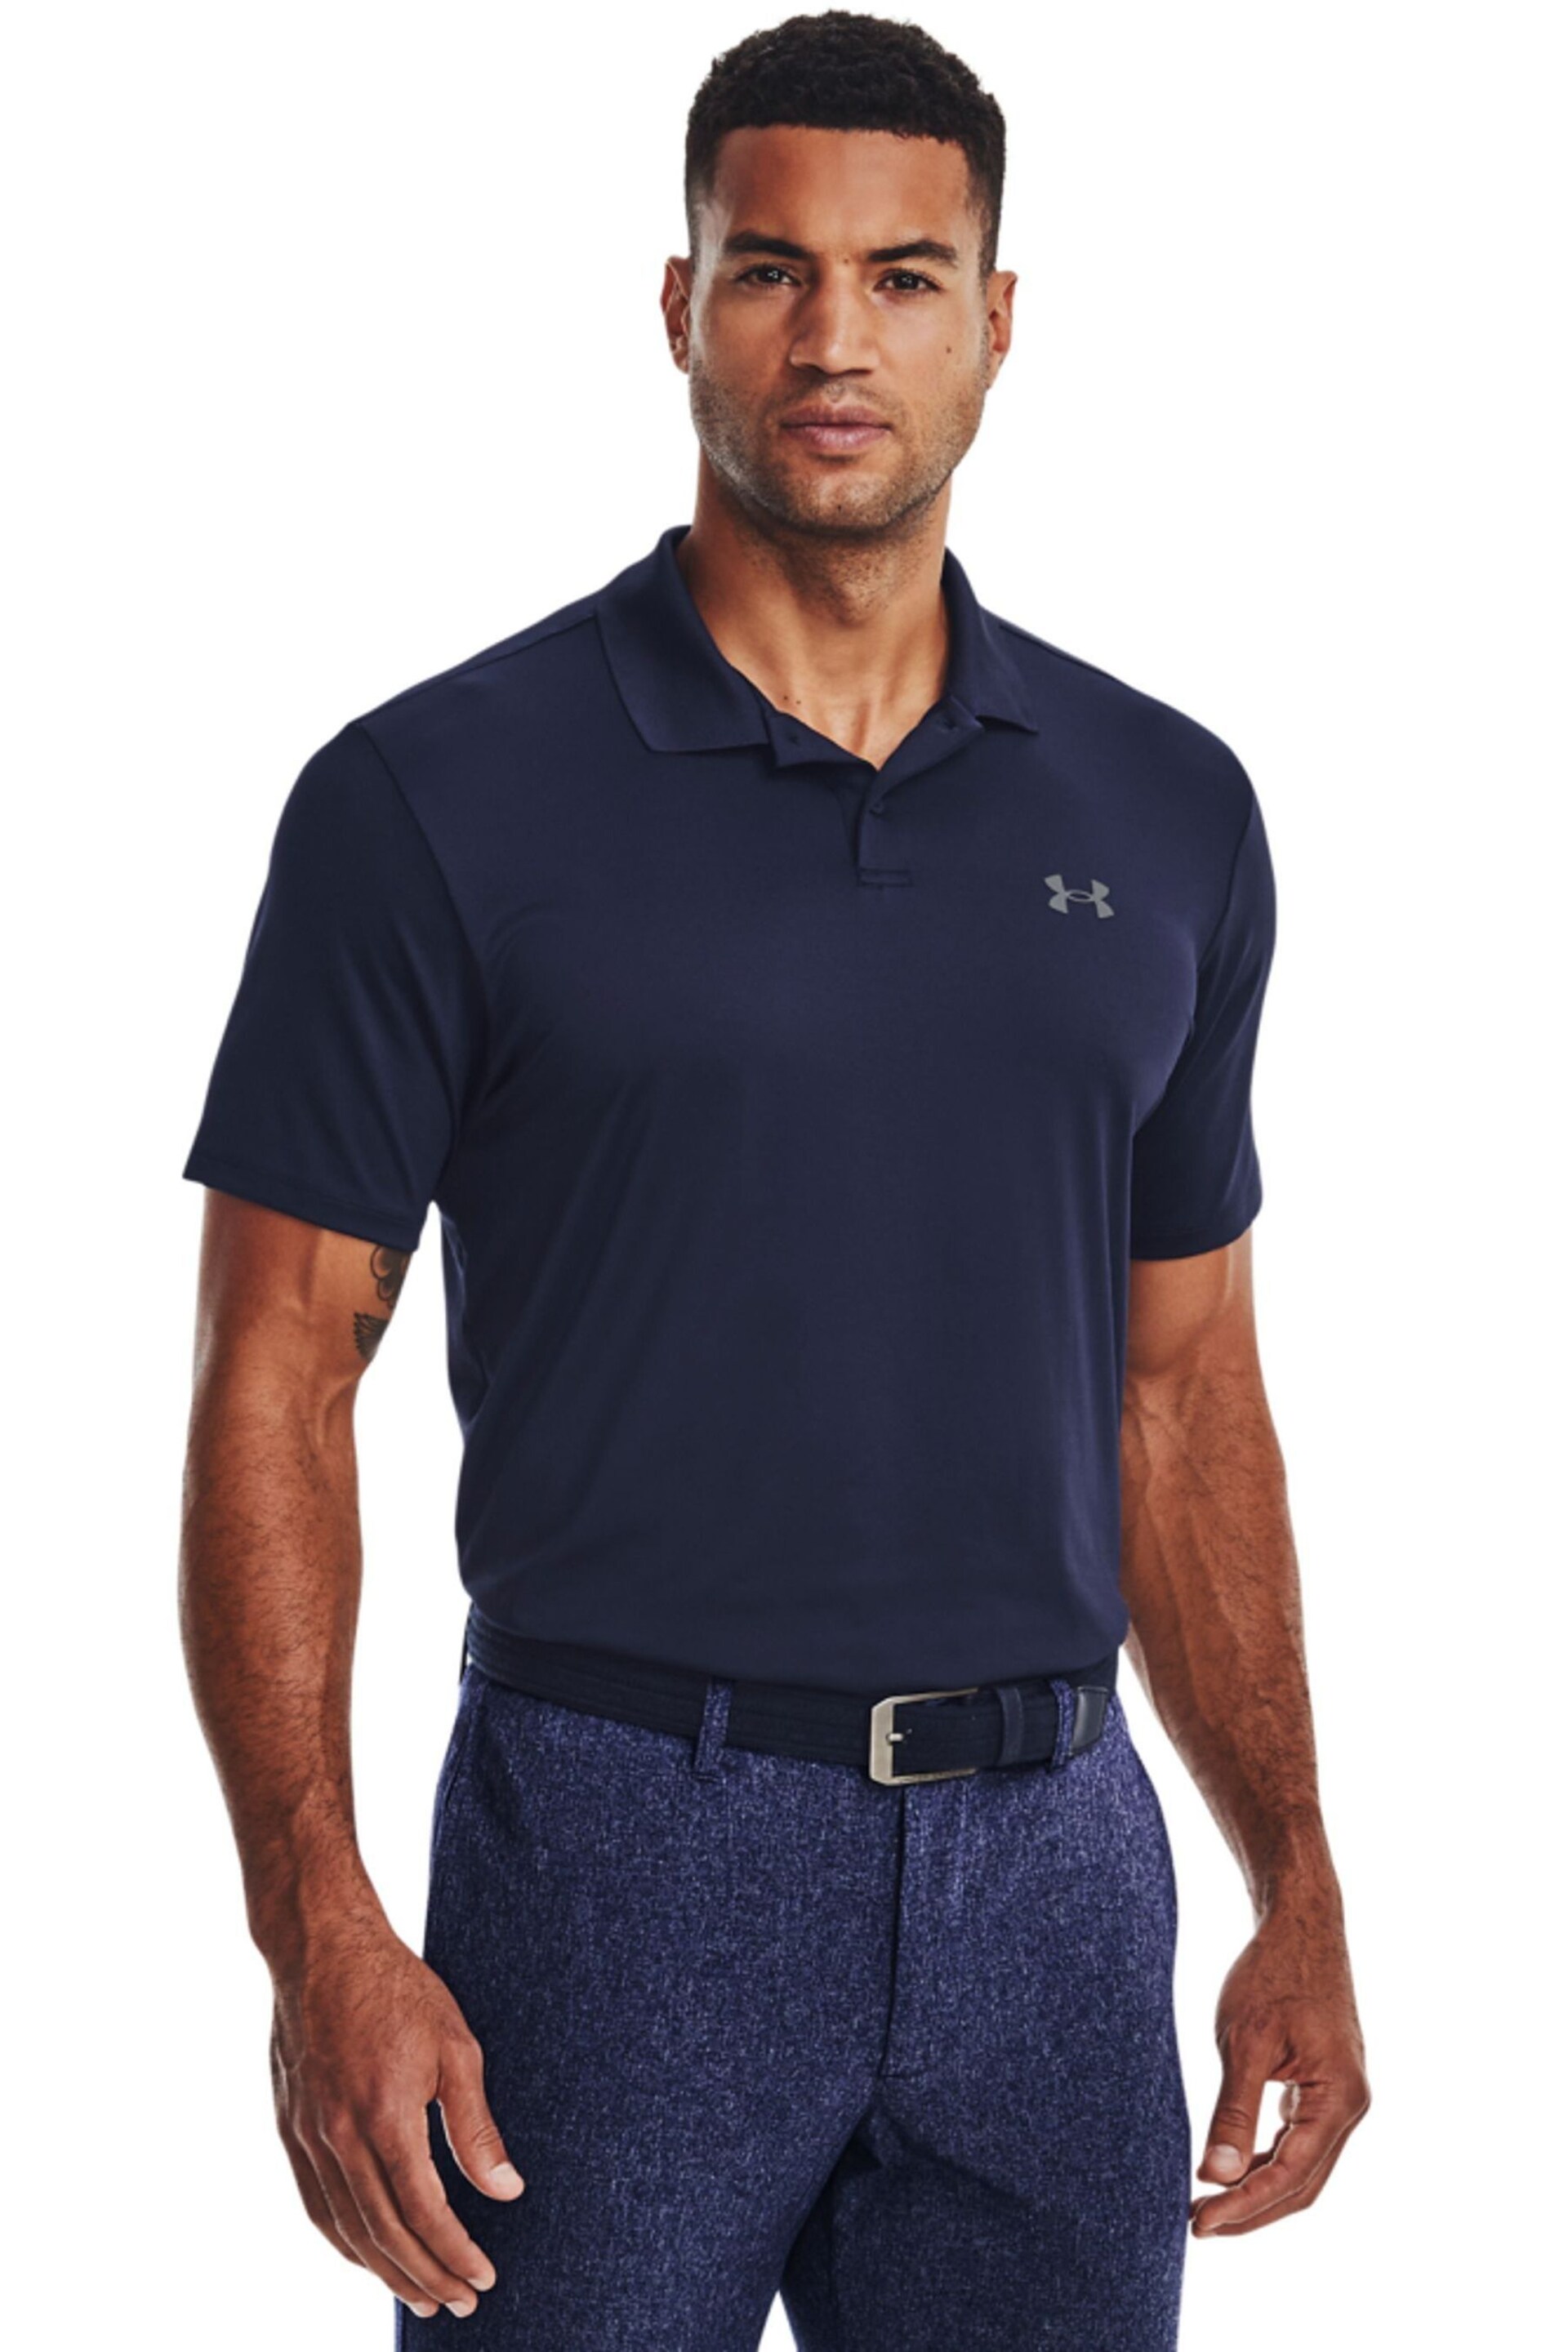 Under Armour Navy Blue/Grey Golf Performance 3.0 Polo Shirt - Image 1 of 5